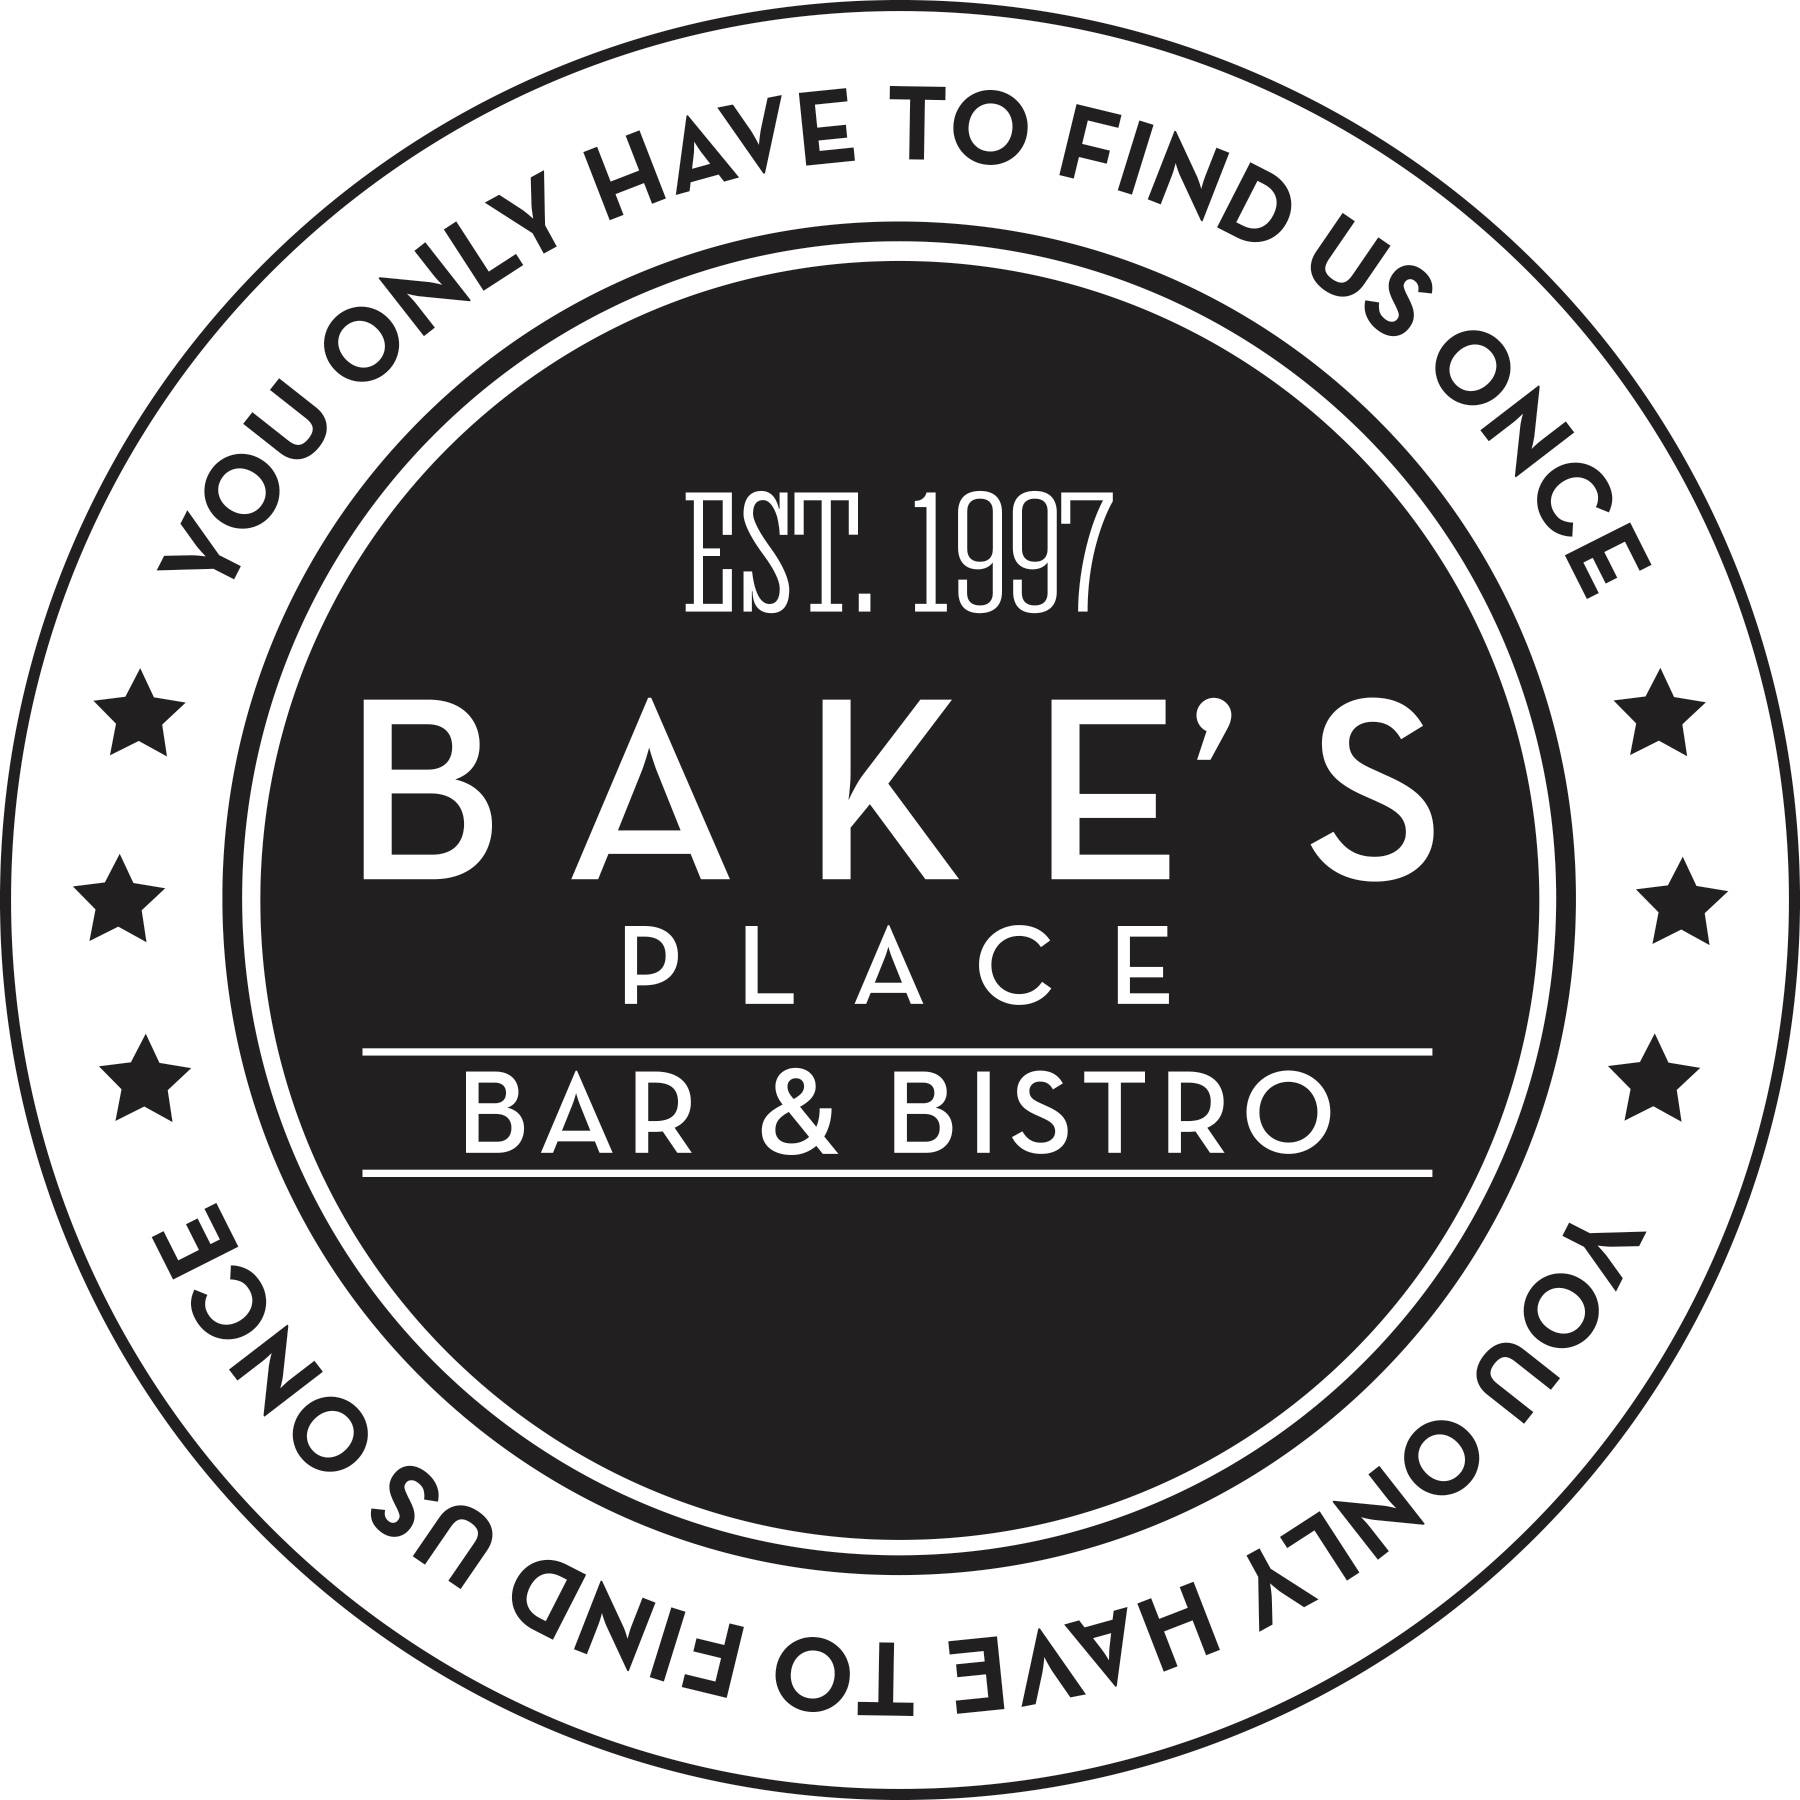 Company logo of Bake's Place Bar & Bistro